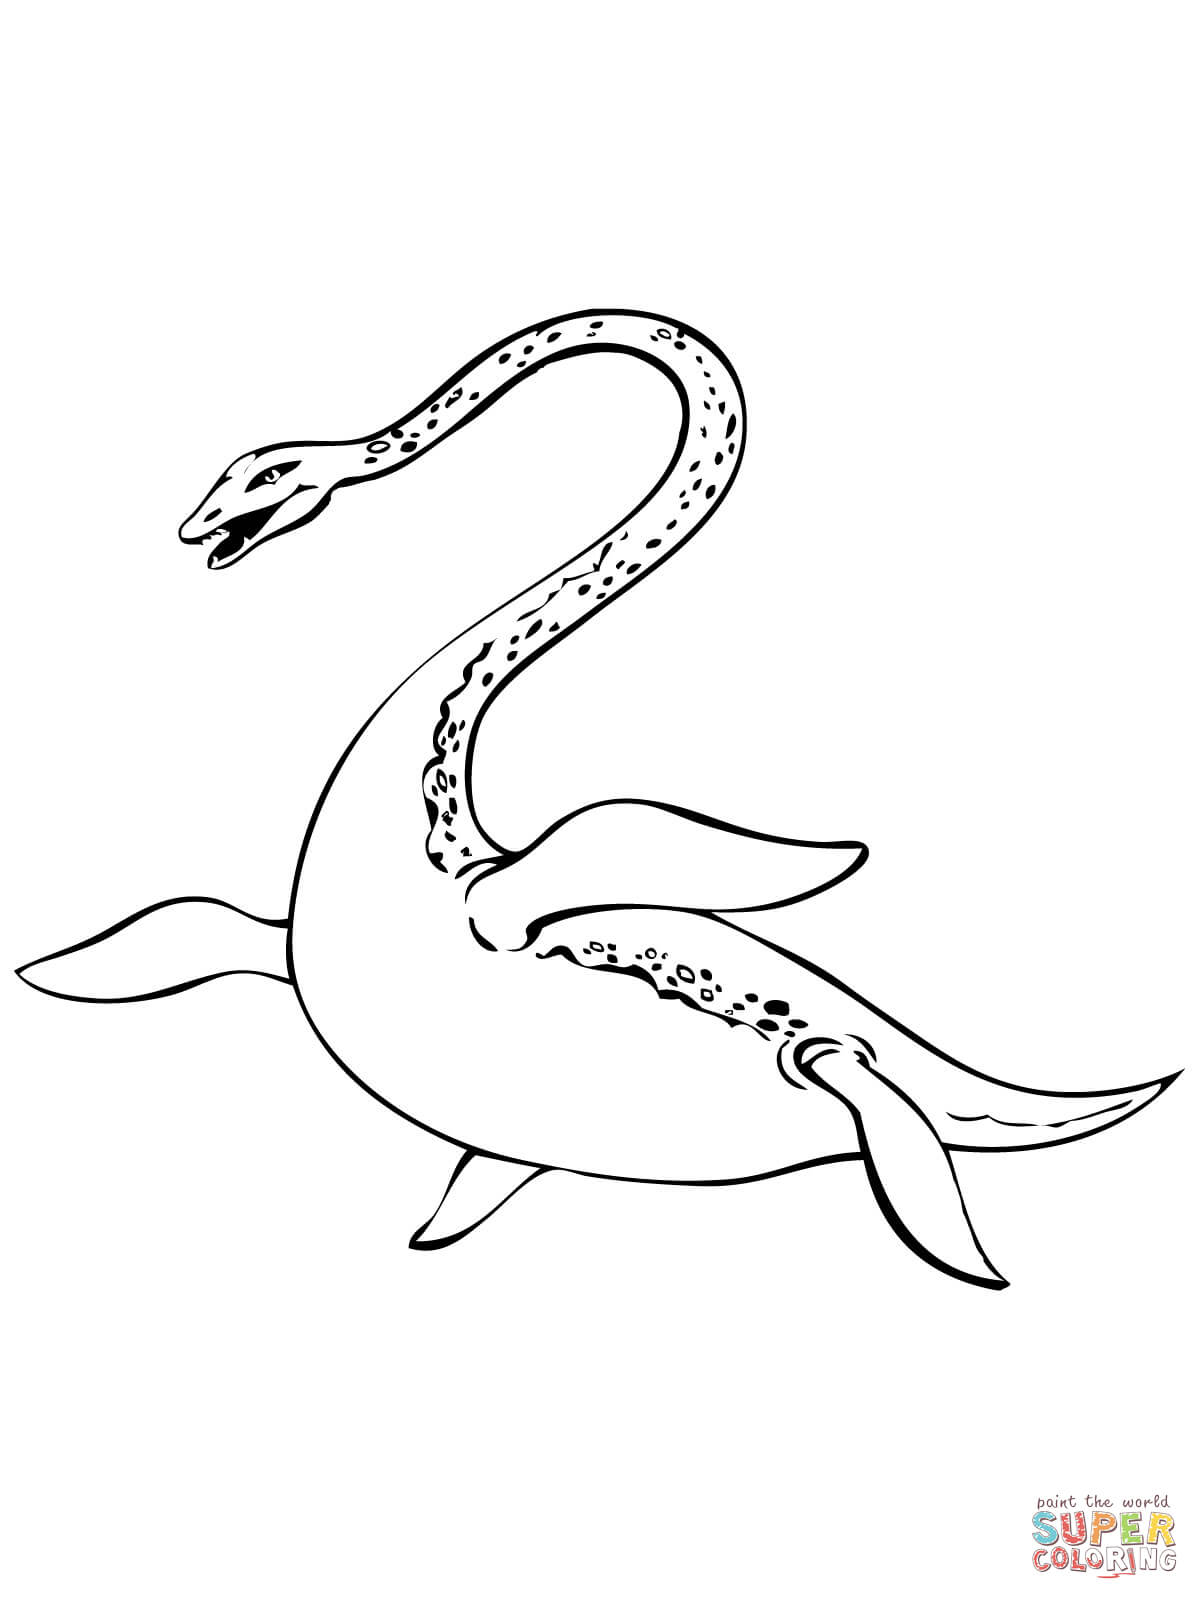 Sea Monster Coloring Pages Nessie Loch Ness Lake Monster Coloring Page Free Printable